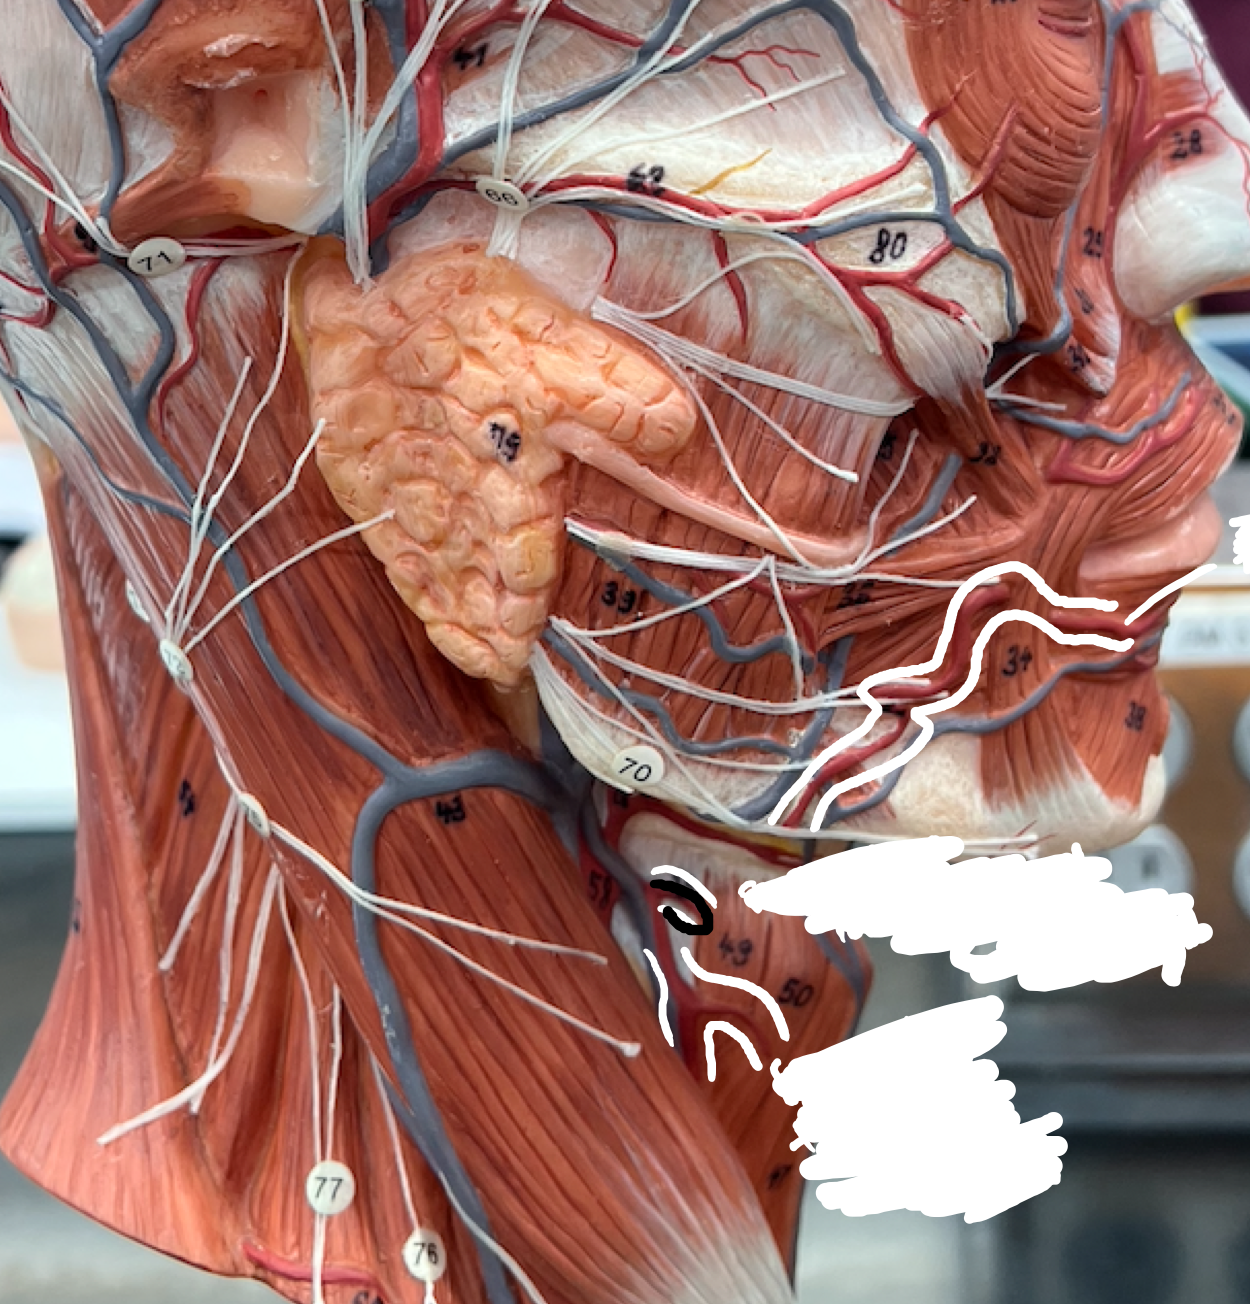 <p>The top forked part coming off the superior thyroid artery</p>